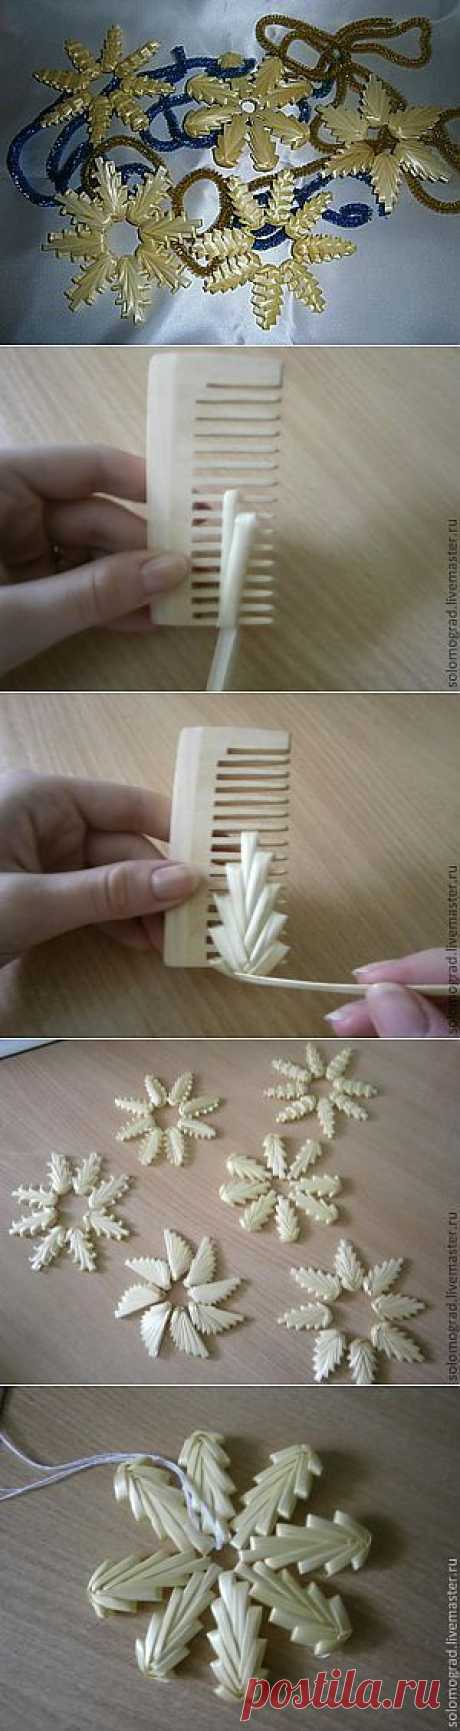 (2) What is this, and why haven't I seen this before? stelle | Craft Ideas